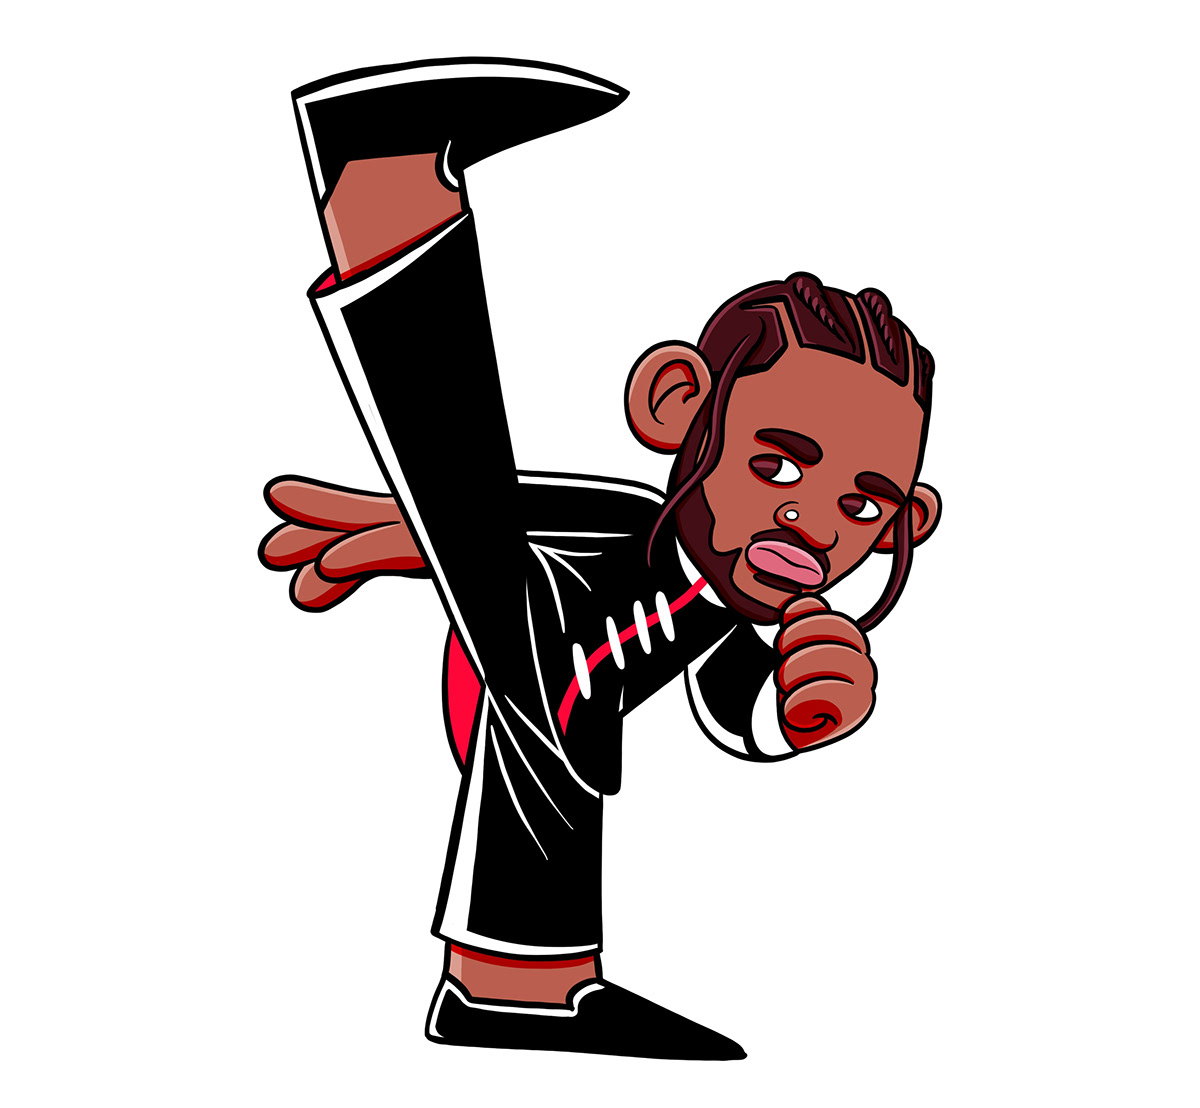 Illustration of Kendrick Lamar doing a karate kick in the air, inspire by his theme kung foo Kenny 